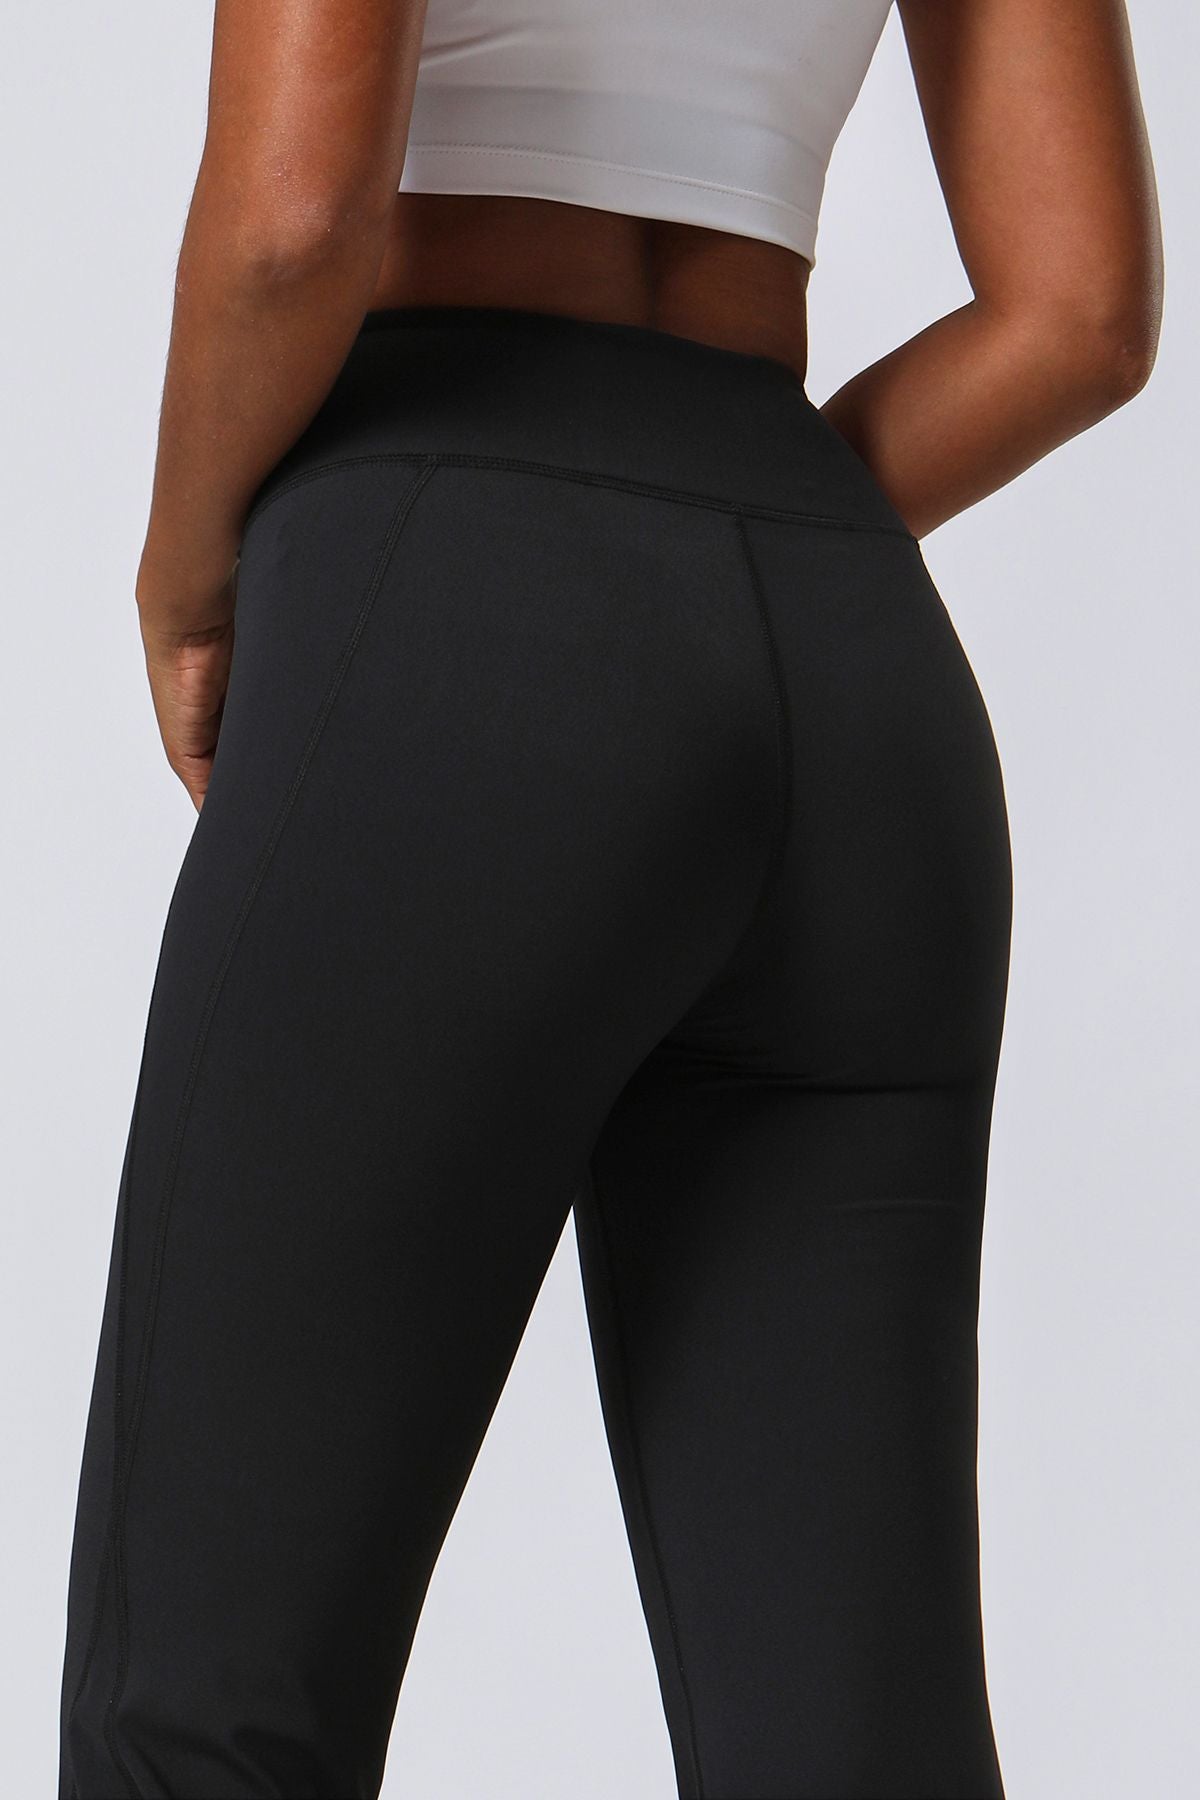  Flare Leggings For Women Tummy Control High Waisted